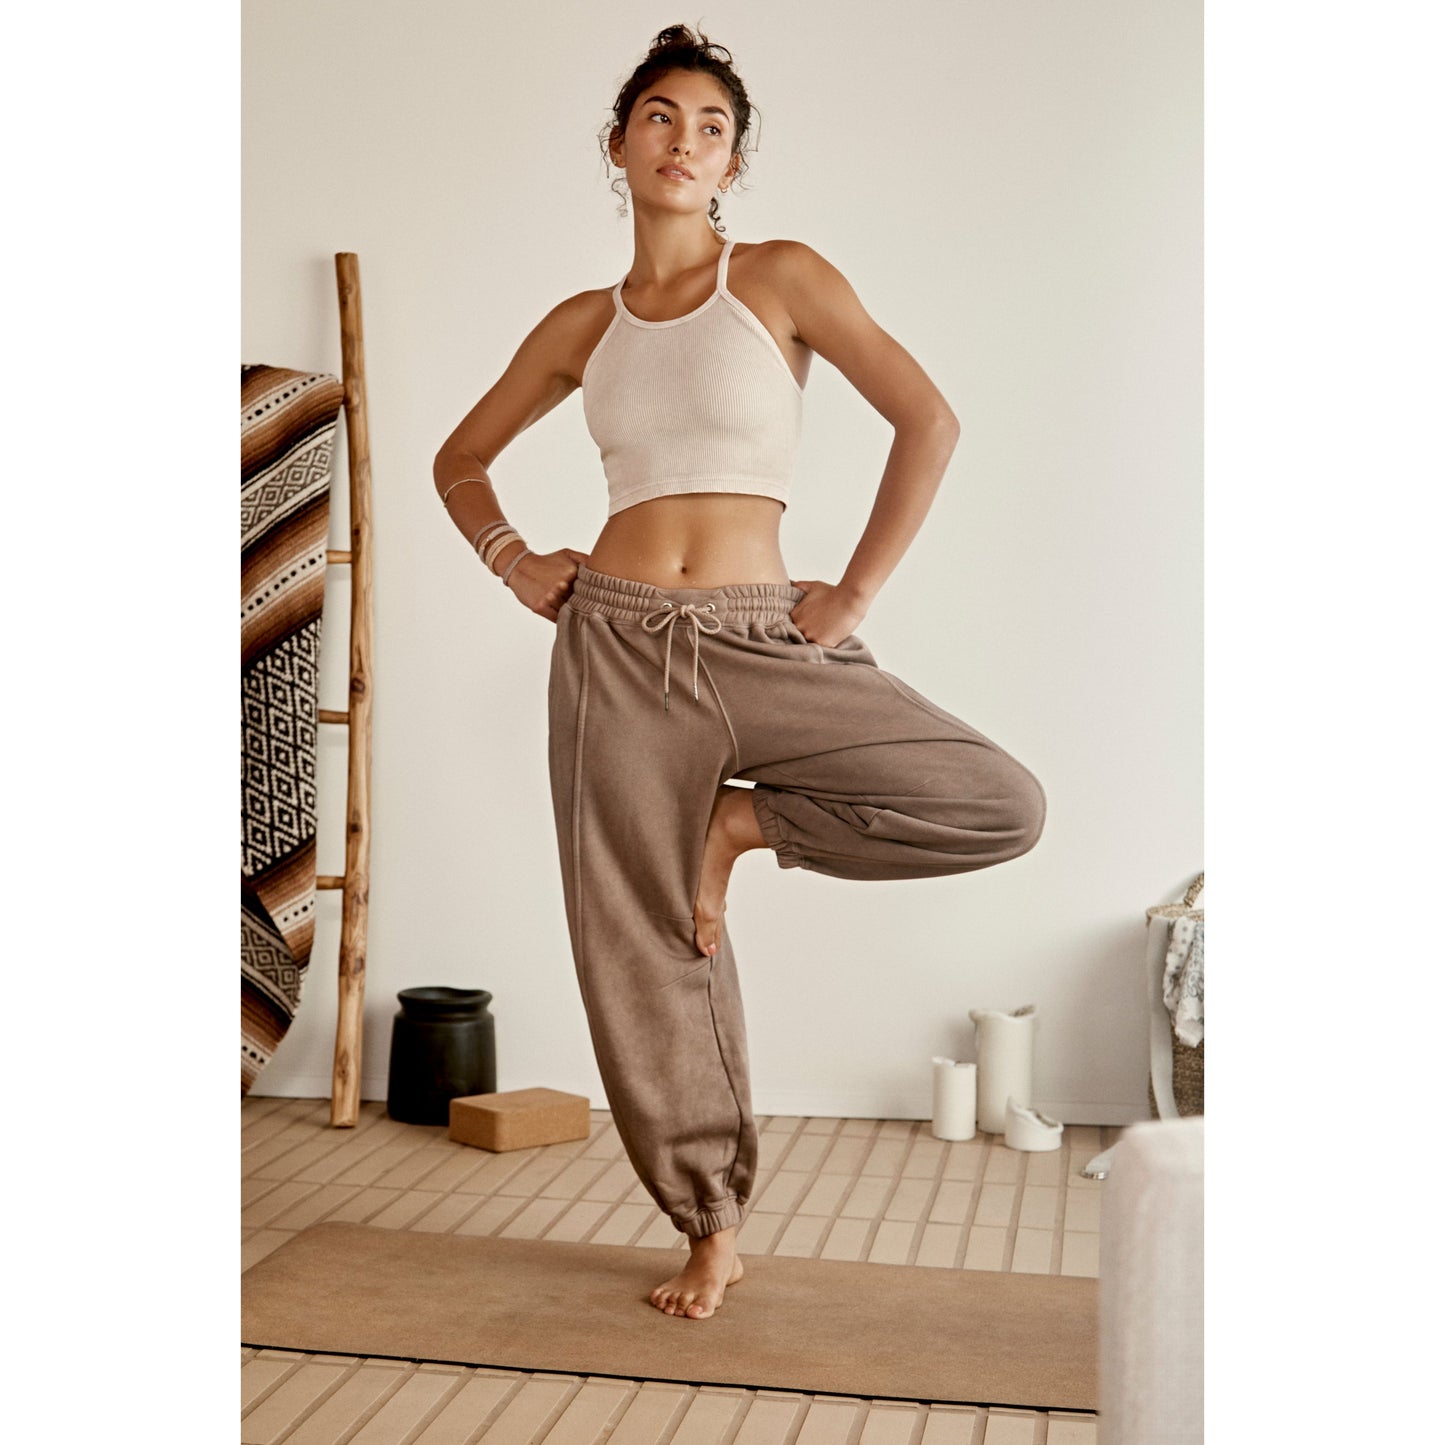 A woman in a white sports bra and Sprint To the Finish Pant, Hickory poses confidently with her hand on her hip in a well-lit room with neutral decor.